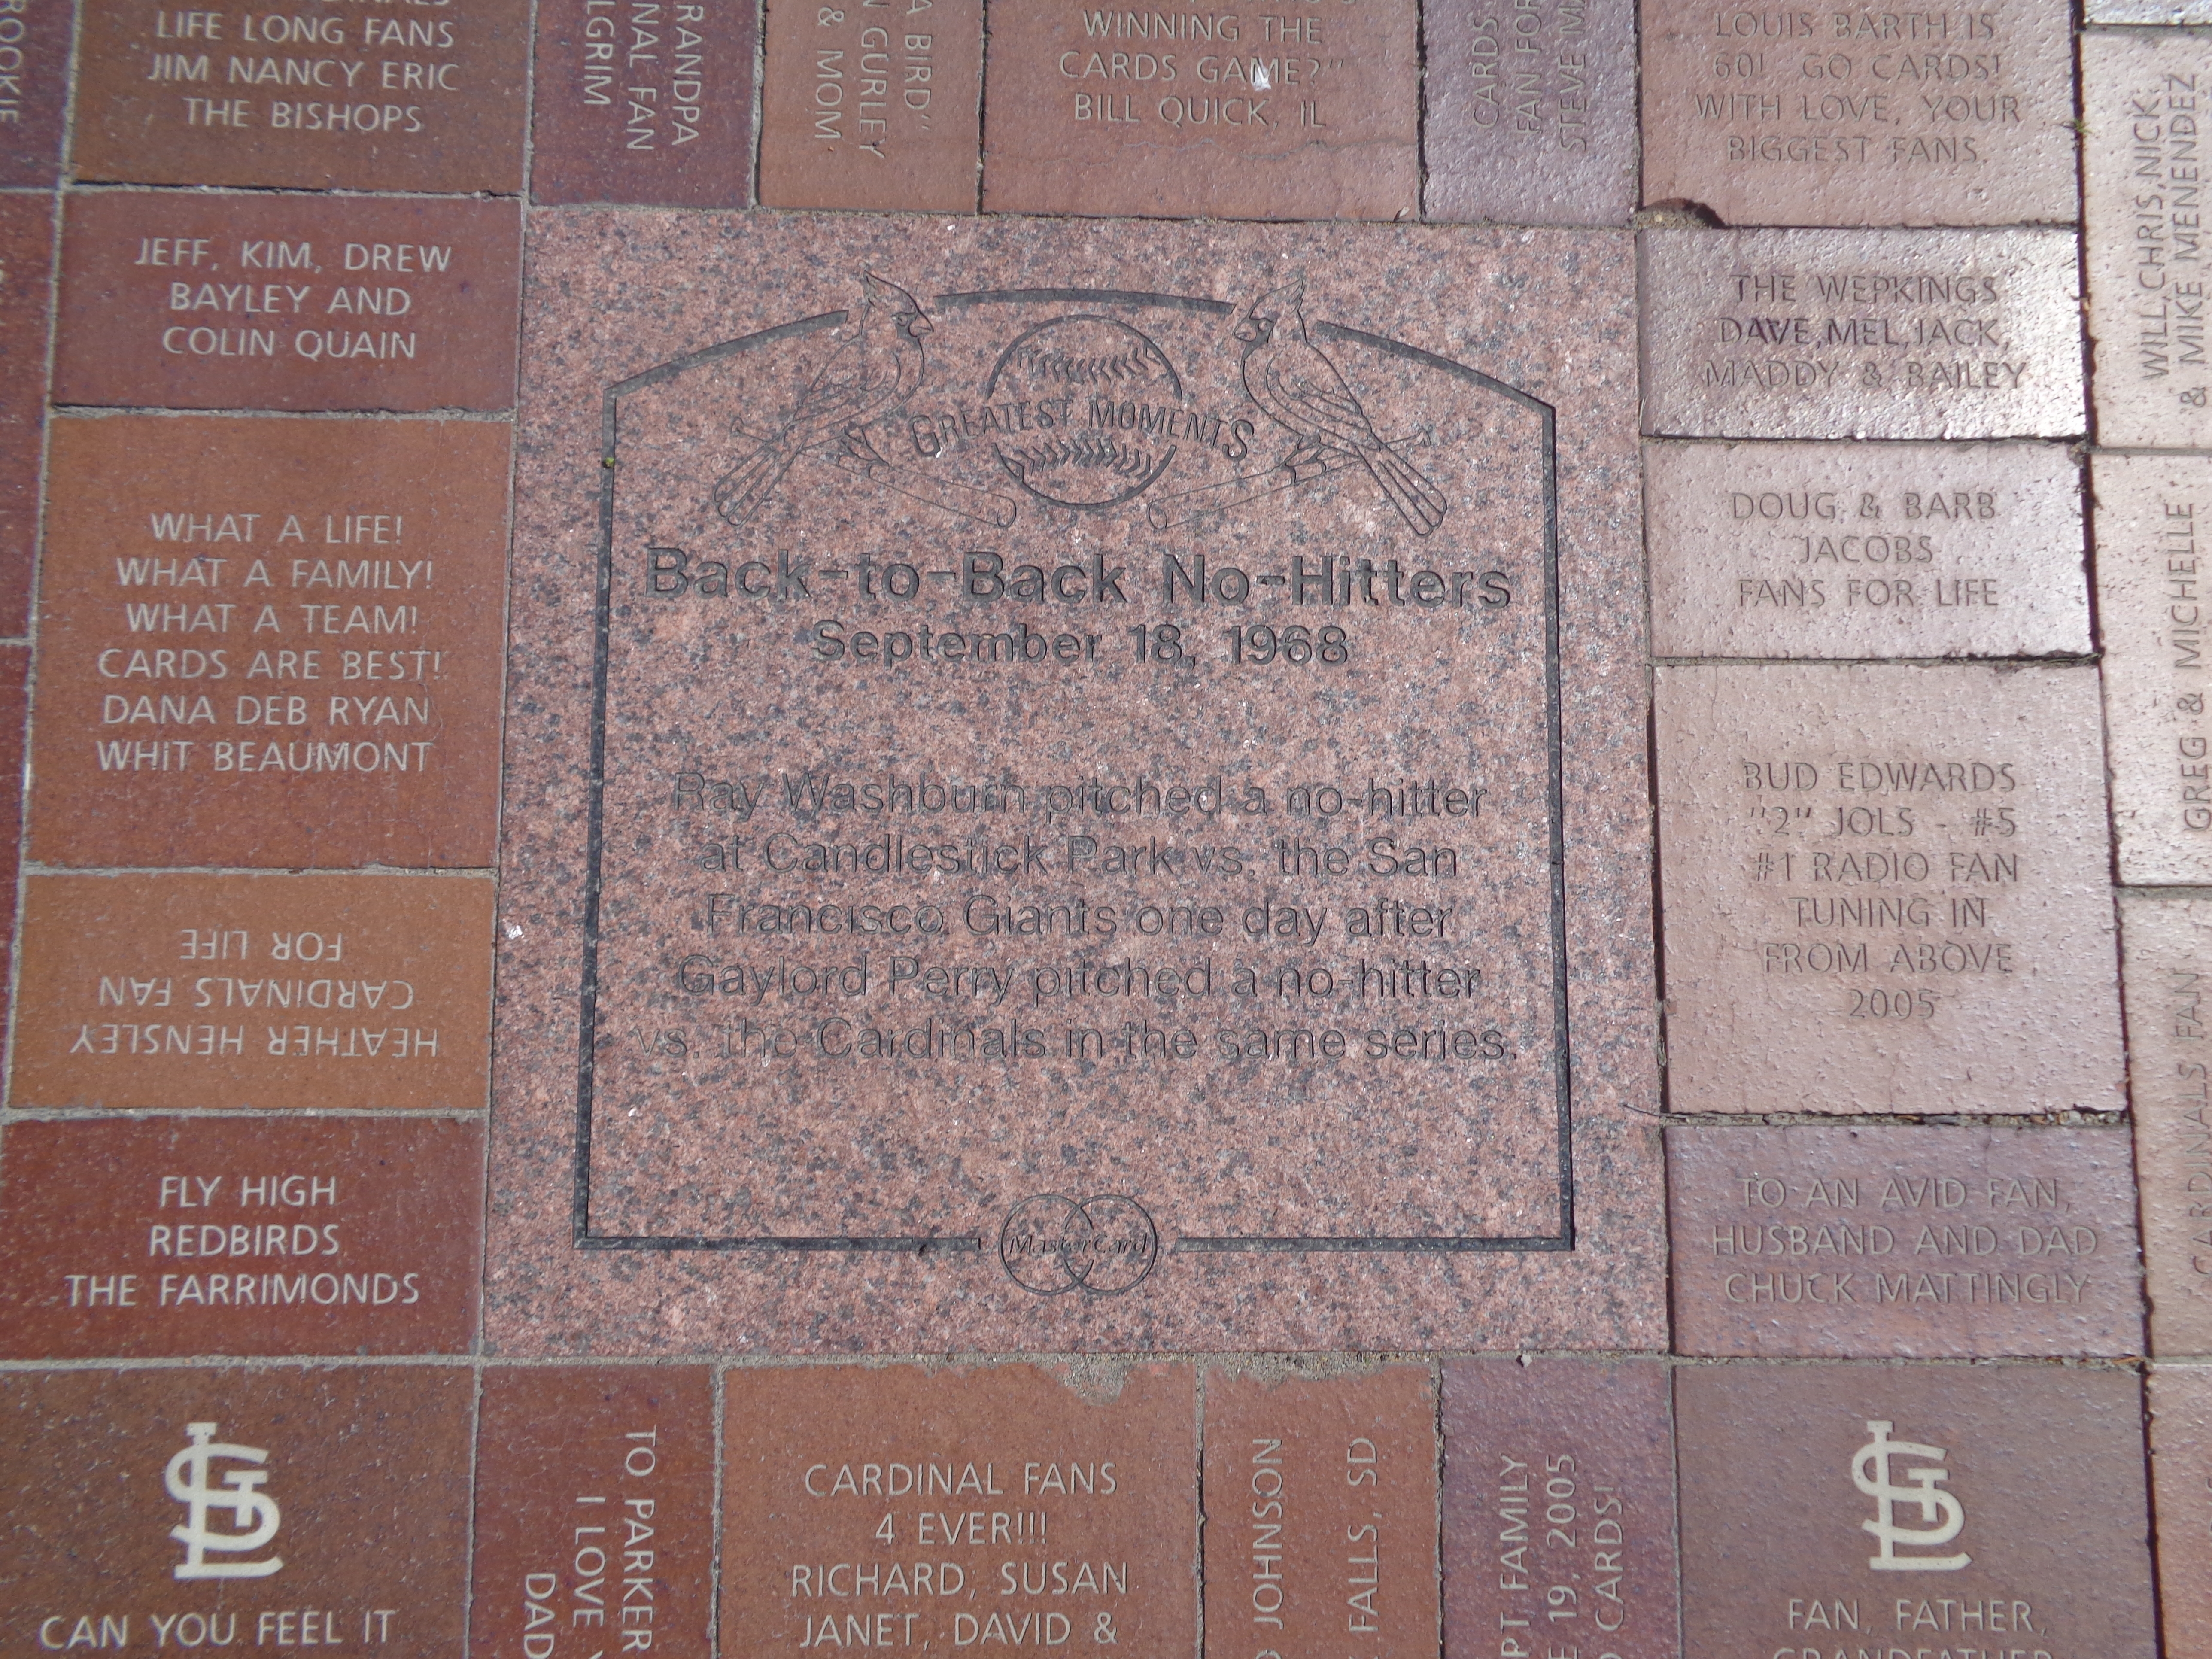 Back-to-Back No-Hitters Marker